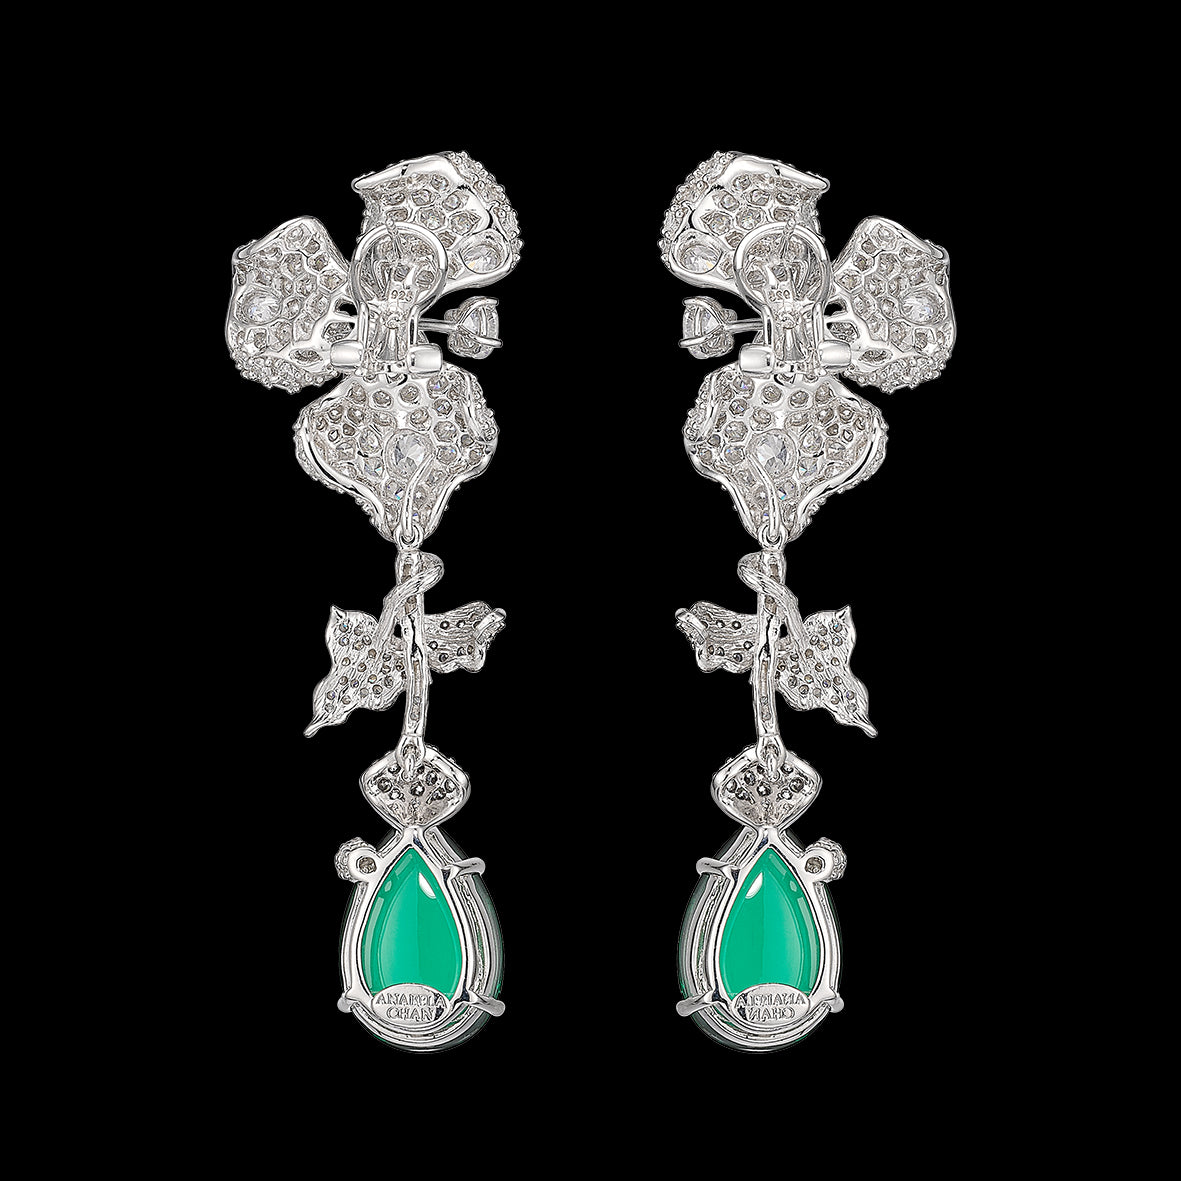 Orchid Emerald Earrings, Earrings, Anabela Chan Joaillerie - Fine jewelry with laboratory grown and created gemstones hand-crafted in the United Kingdom. Anabela Chan Joaillerie is the first fine jewellery brand in the world to champion laboratory-grown and created gemstones with high jewellery design, artisanal craftsmanship and a focus on ethical and sustainable innovations.